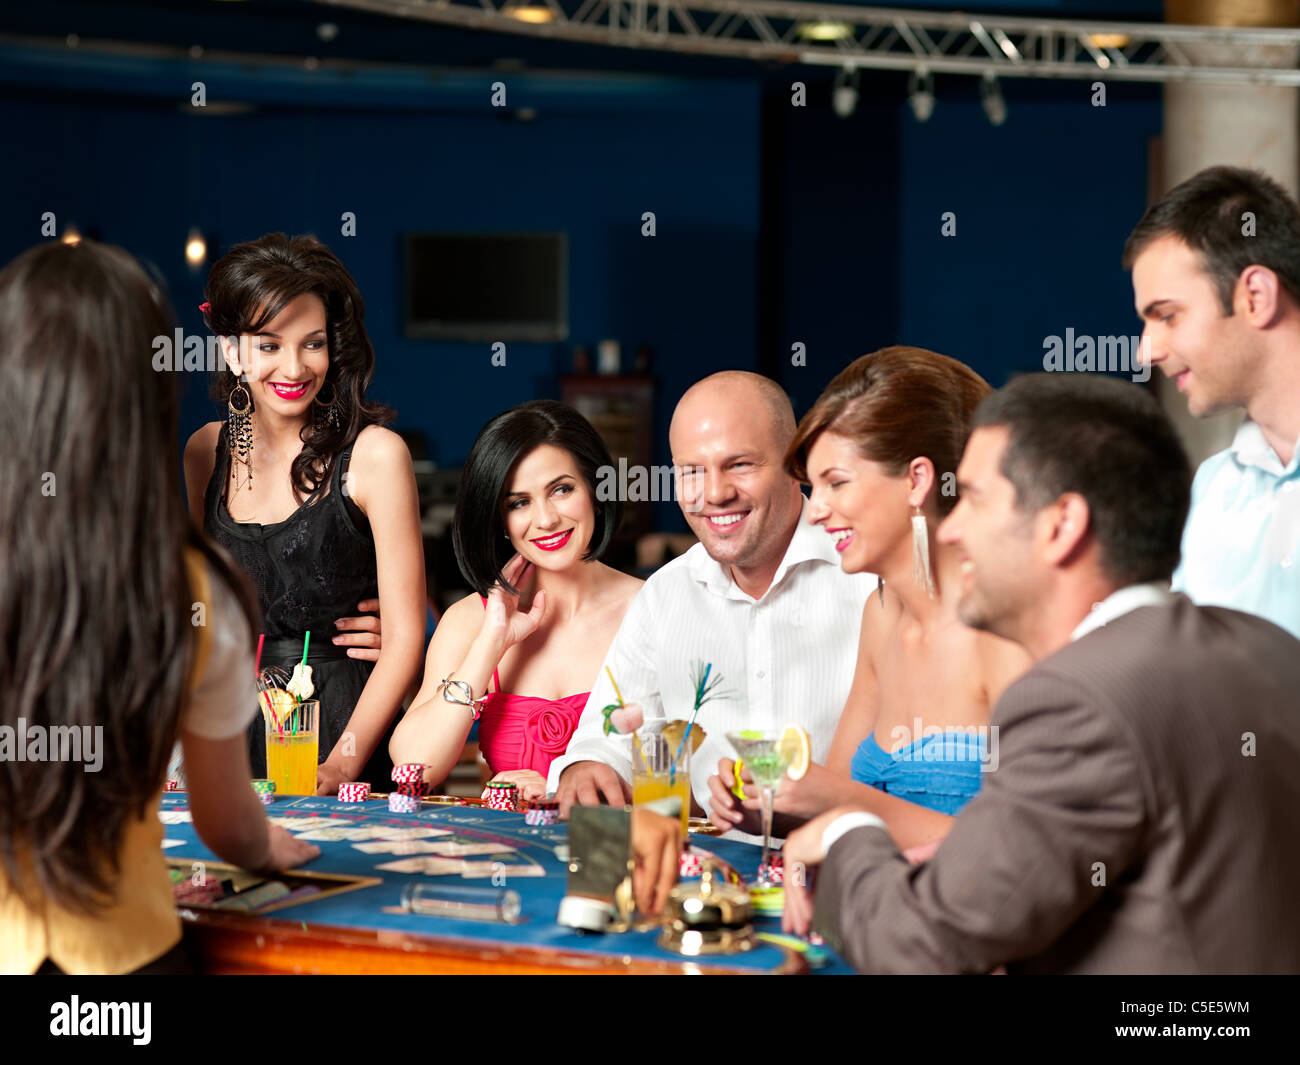 group of people playing blackjack or poker, smiling Stock Photo